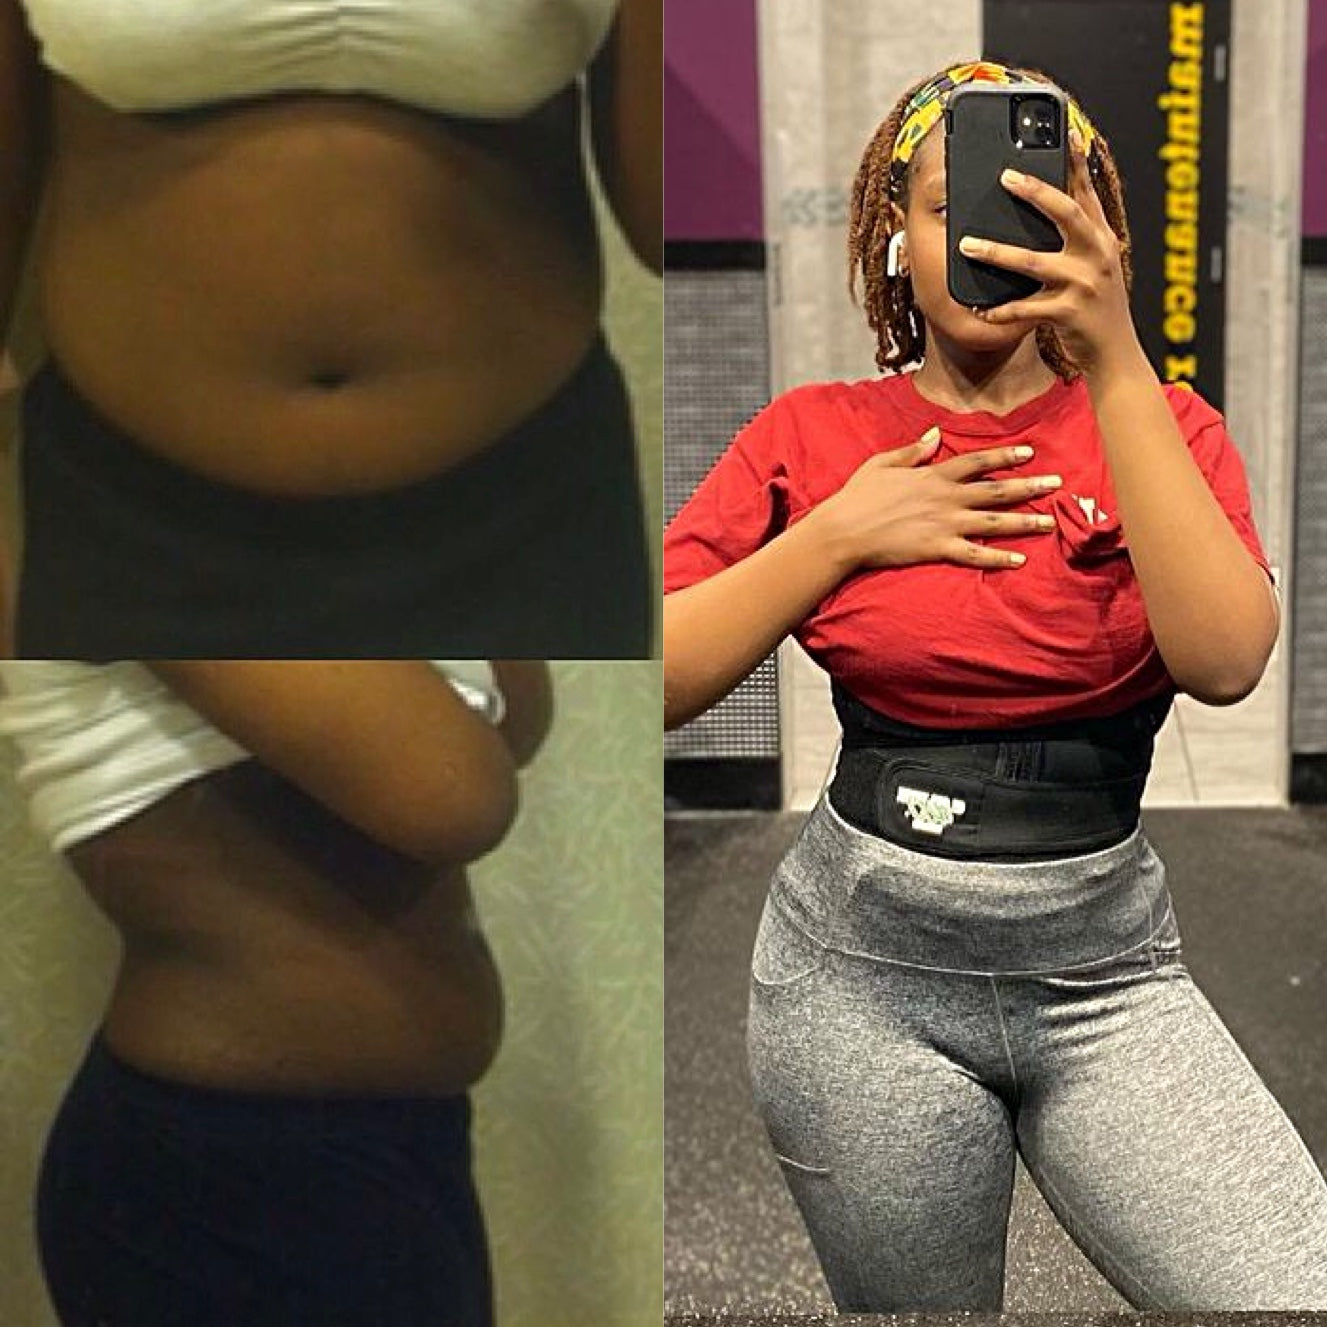 Triple Strap Waist Trainer: Shrink Your Waist in Up to 2 Weeks